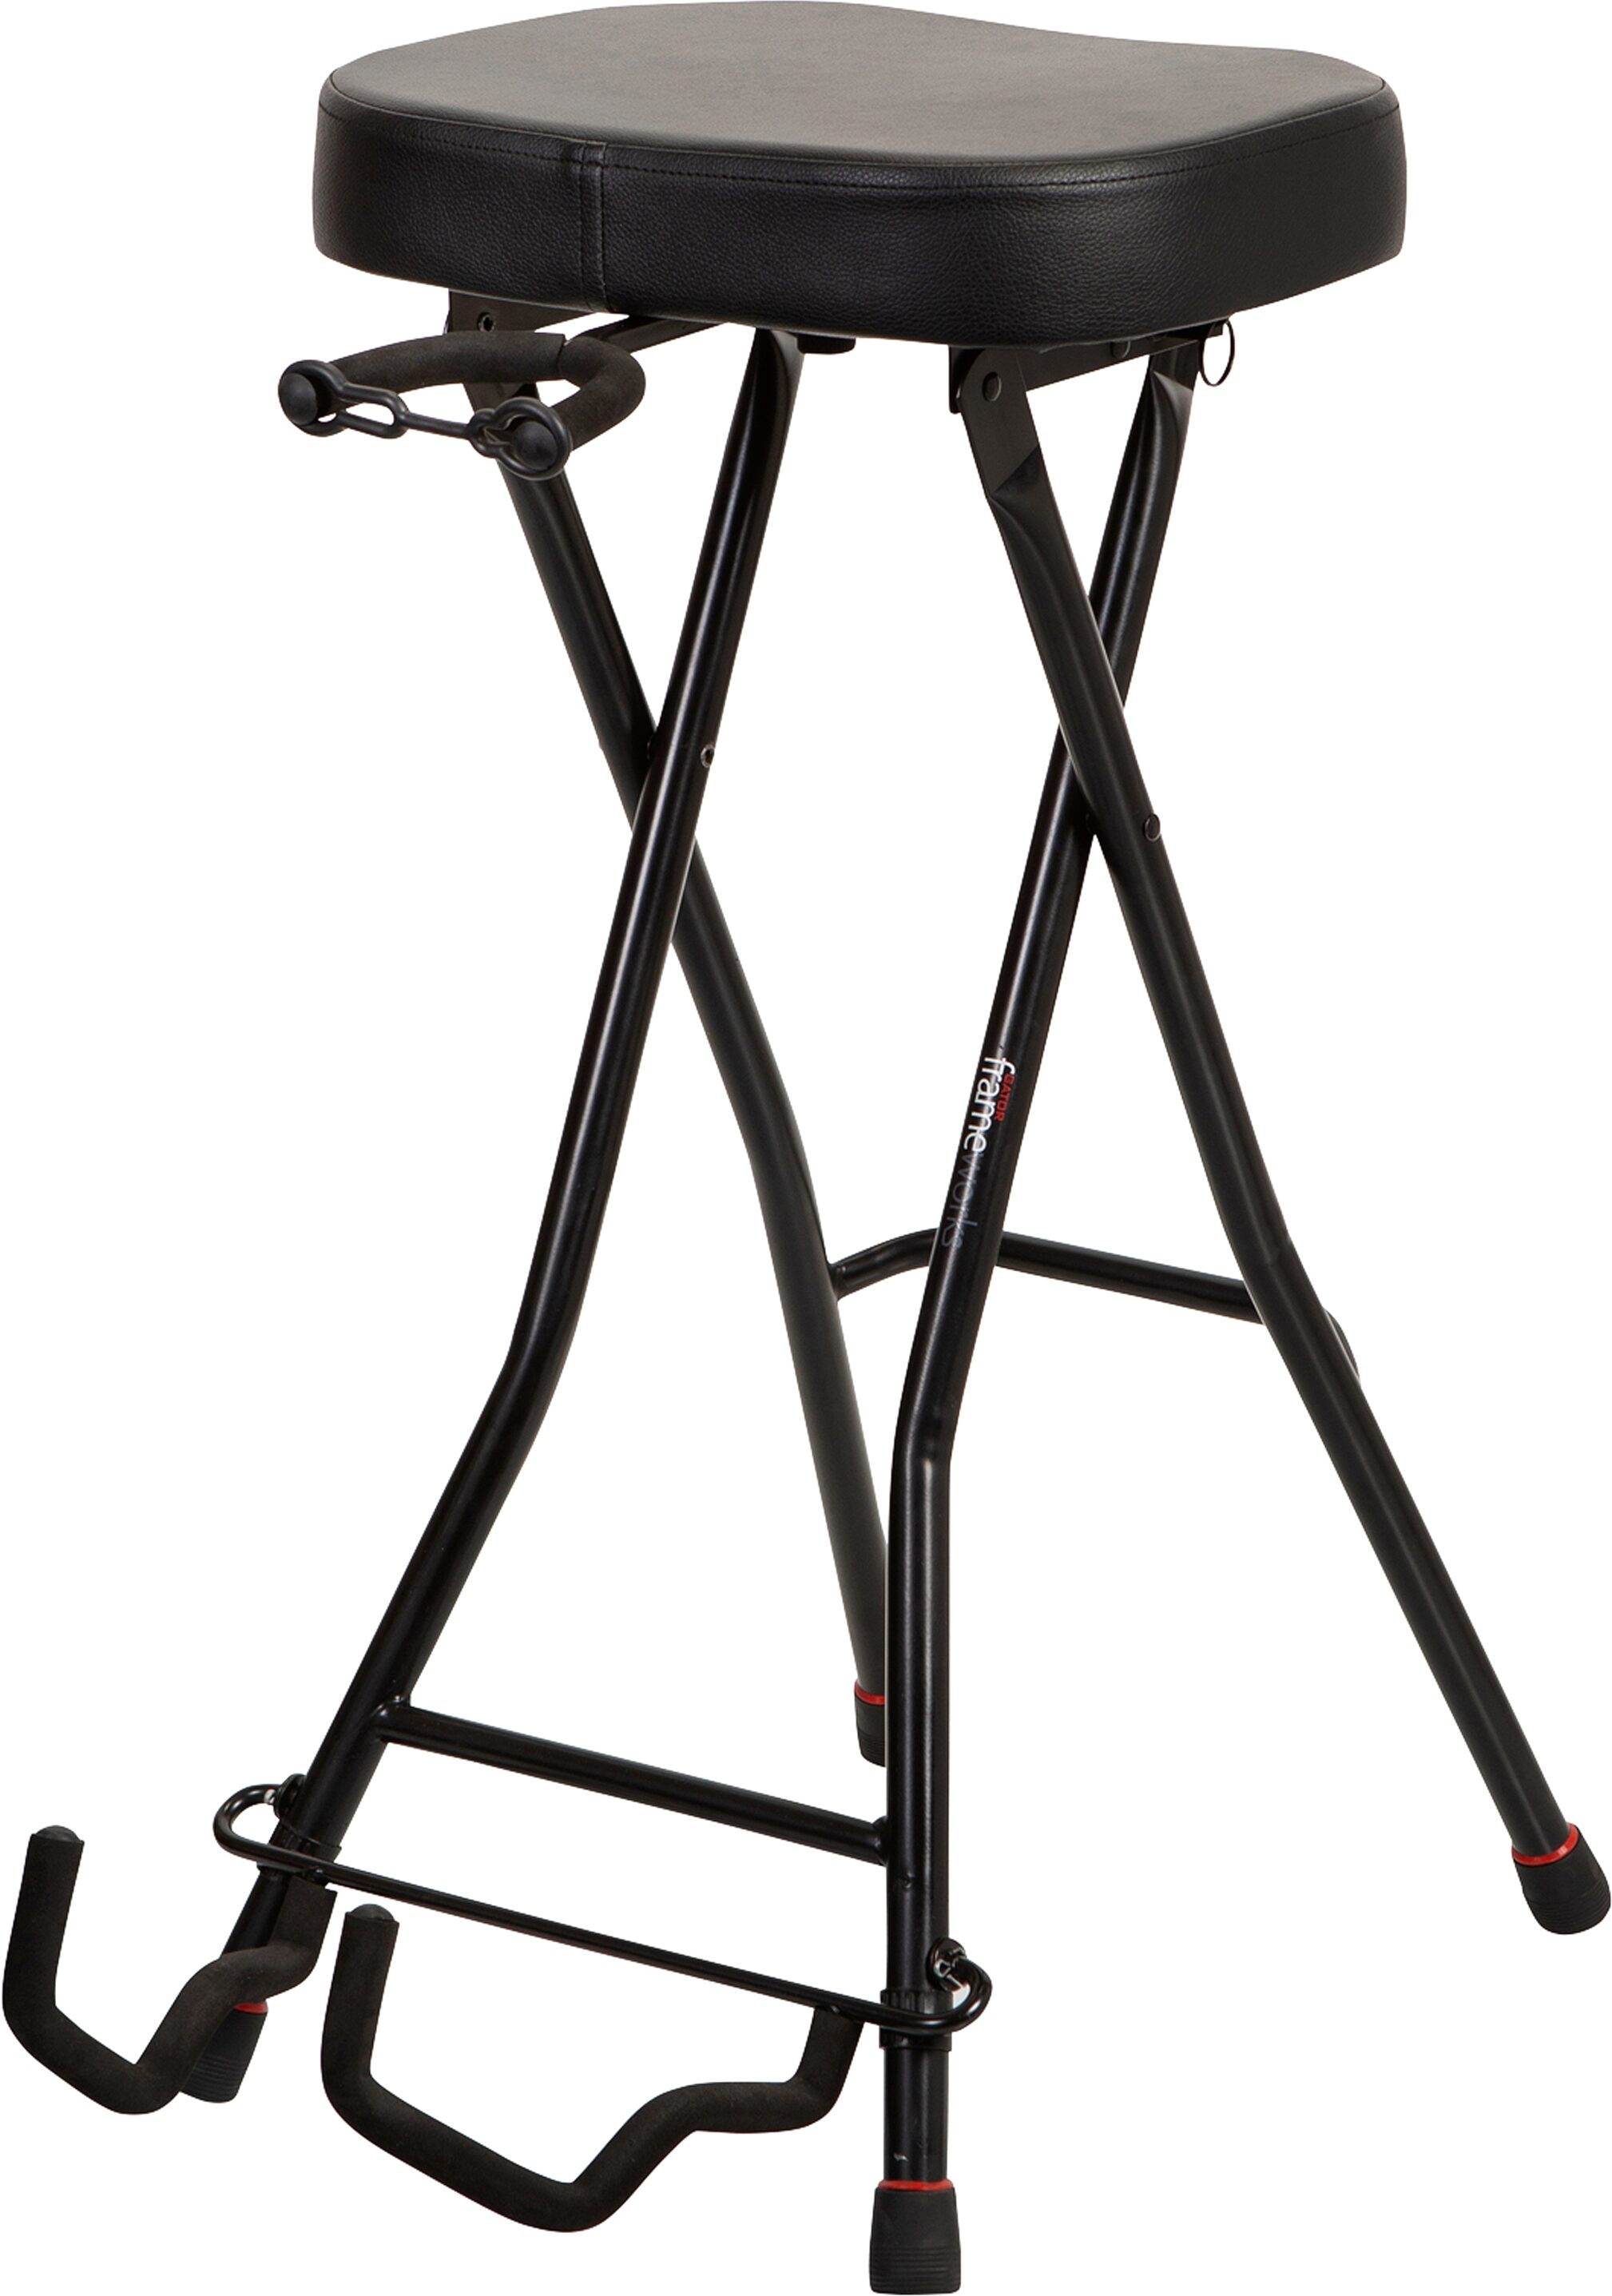 Gator GFW-GTRSTOOL Guitar Stool with Guitar Stand zZounds